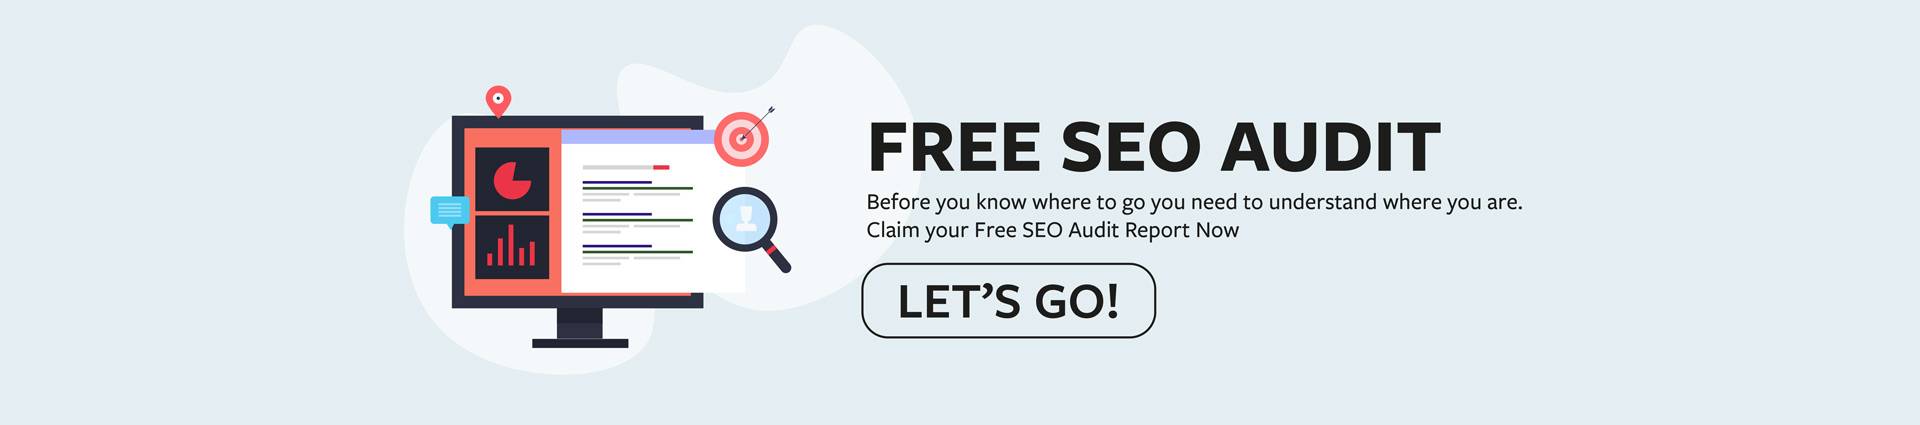 Image button to claim free seo audit